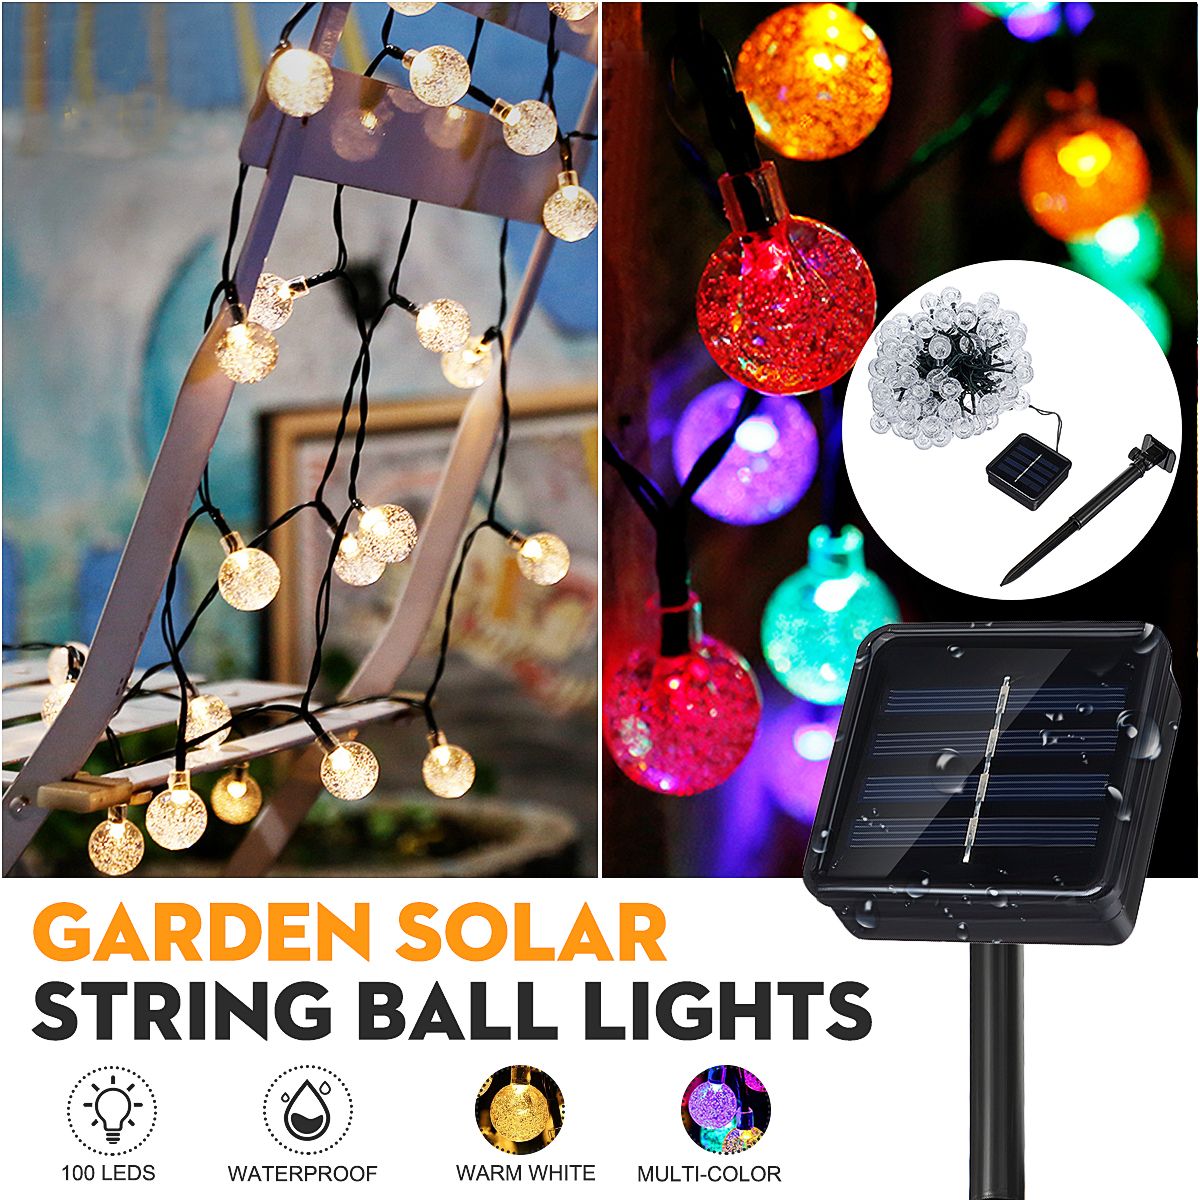 65M-30-LED-Solar-String-Ball-Lights-Outdoor-Waterproof-Warm-White-Garden-Christmas-Tree-Decorations--1672120